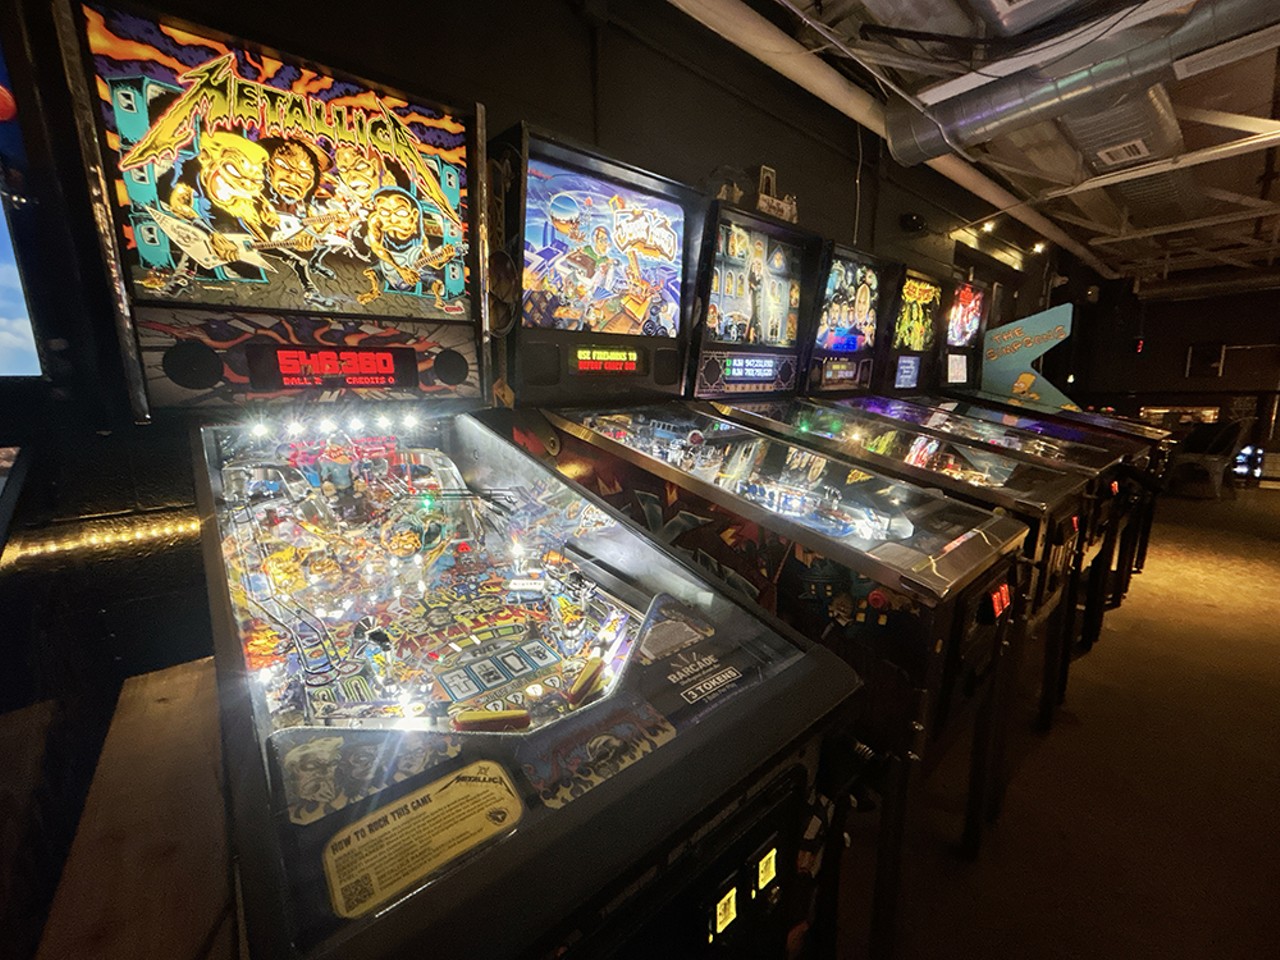 Go to an arcade bar
As long as you don’t buy too many drinks, hitting a bar that also has games is a fun way to enjoy a date and maybe engage in some lighthearted competition too. There are lots of options in Detroit such as Checker Bar, The Yard, Barcade, and more.